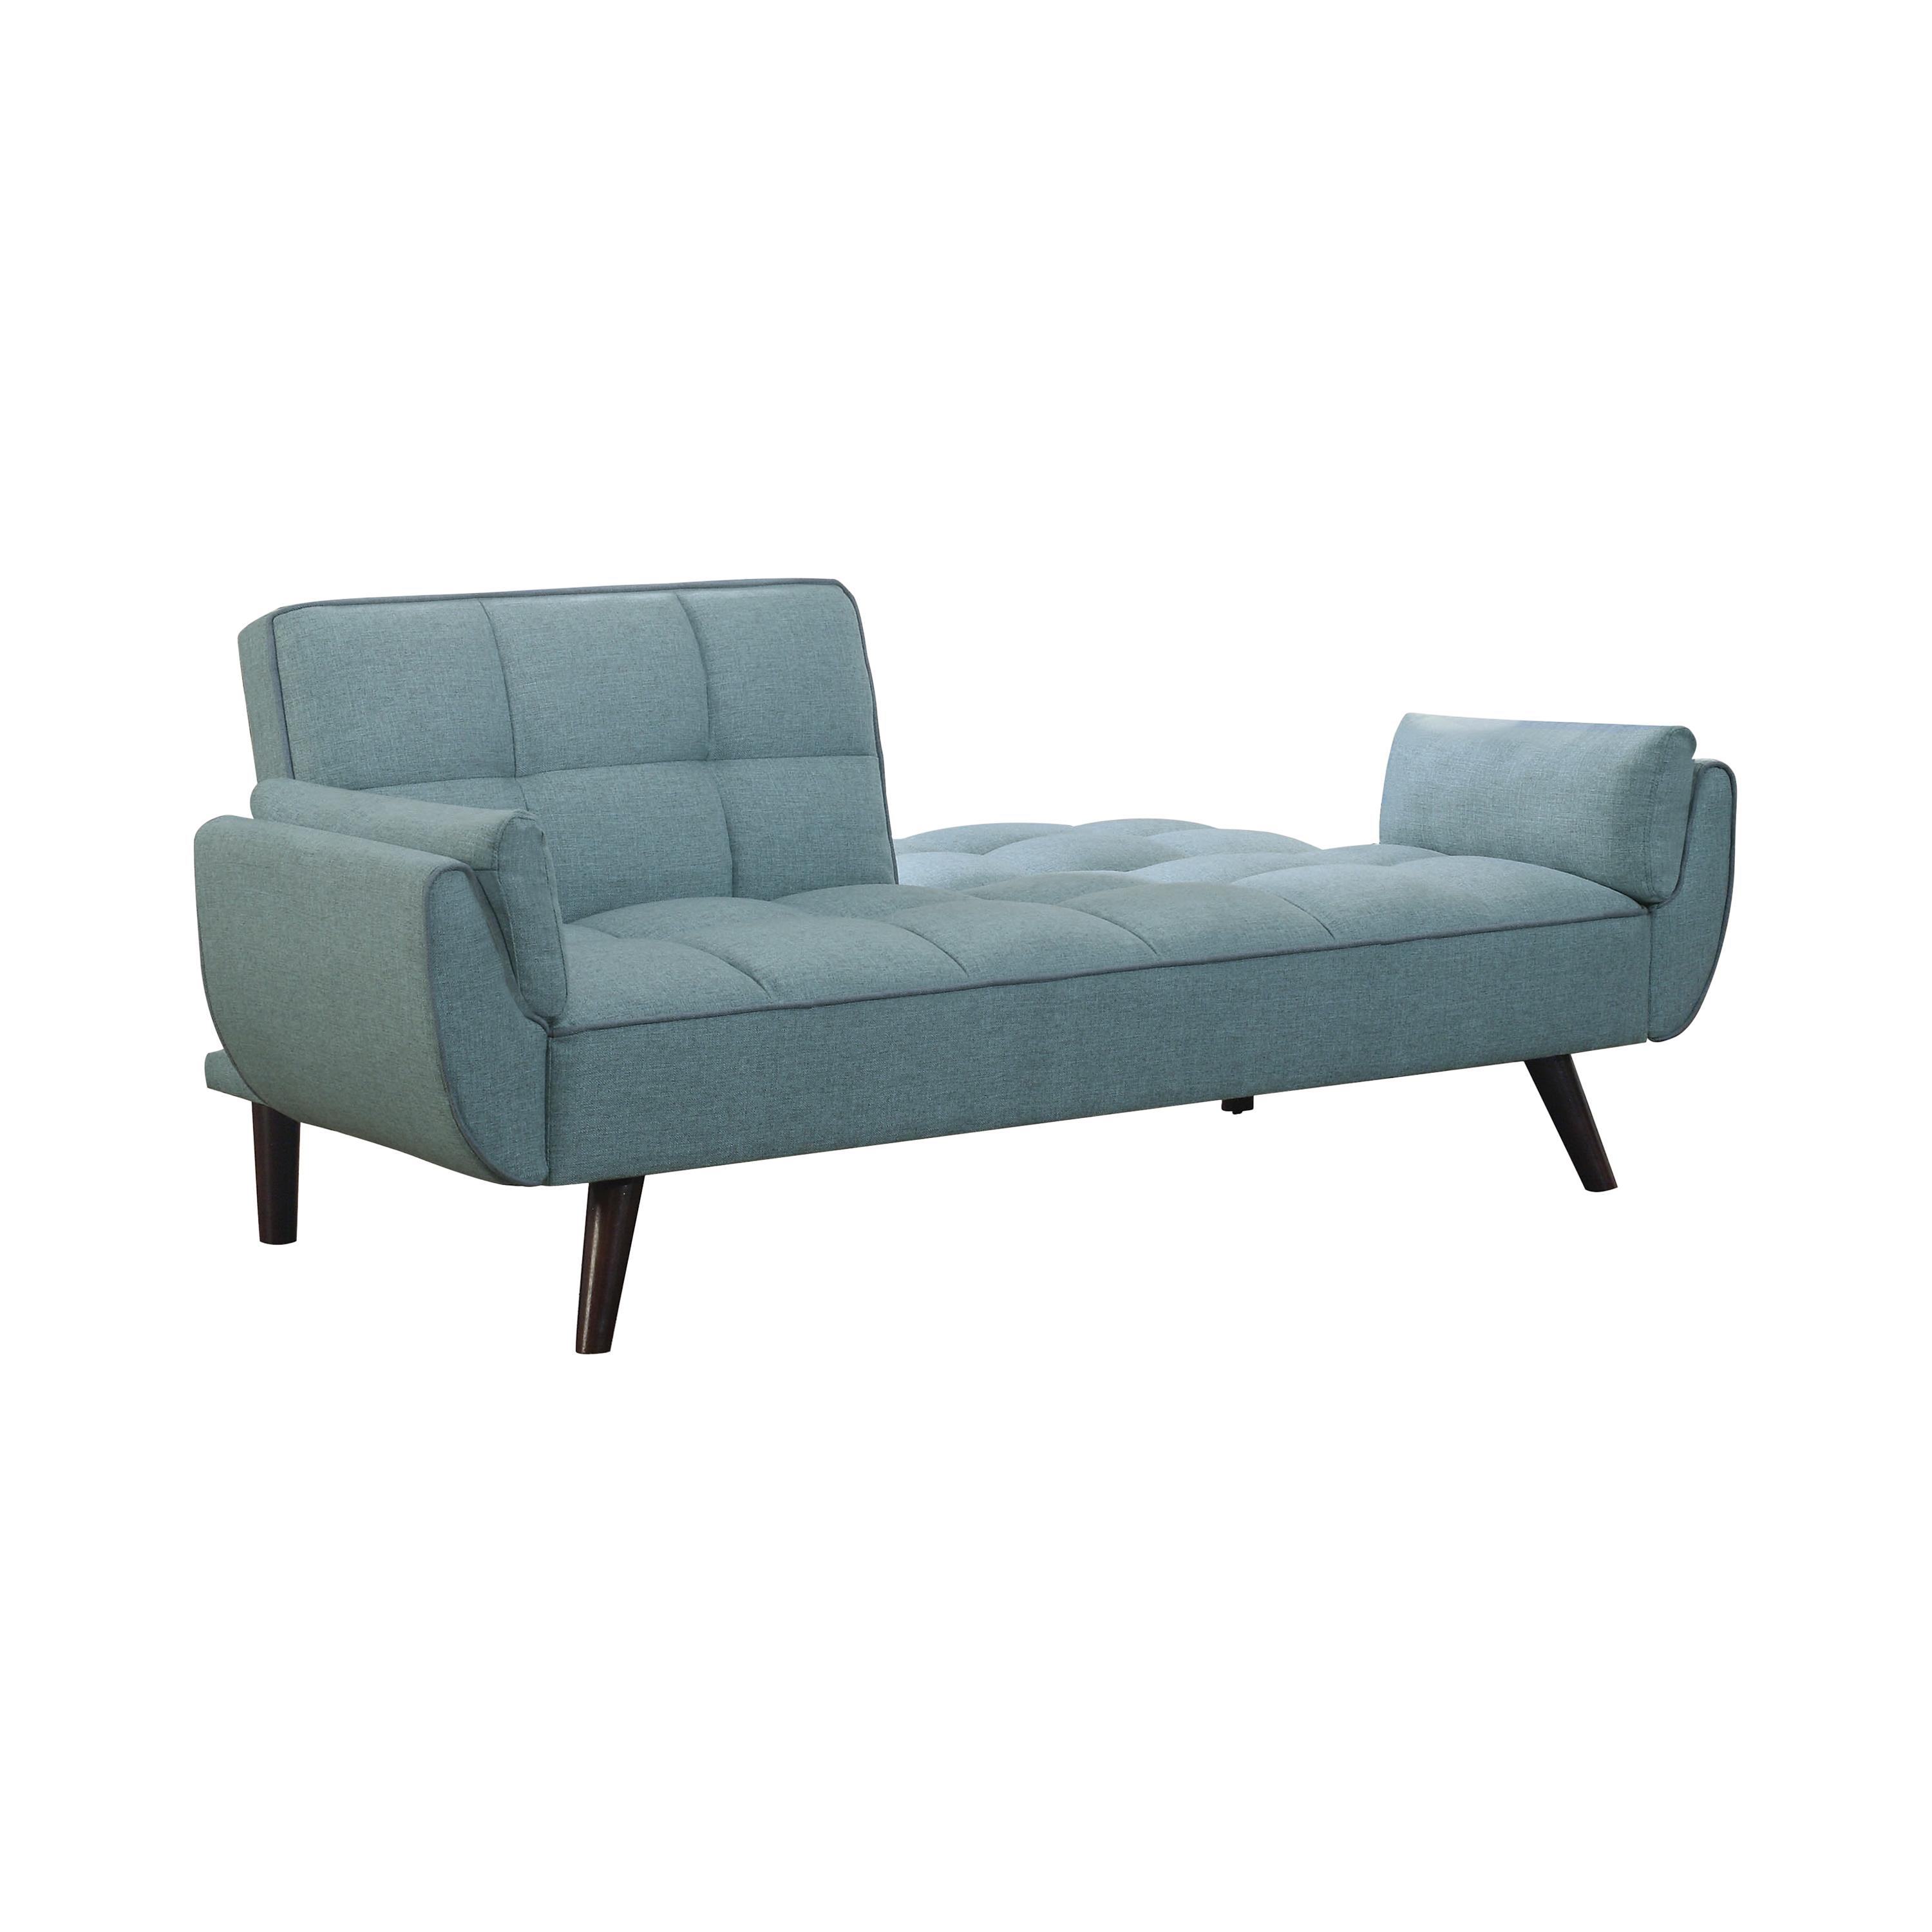 

    
Contemporary Turquoise Blue Woven Fabric Sofa Bed Woven Coaster 360097 Caufield
